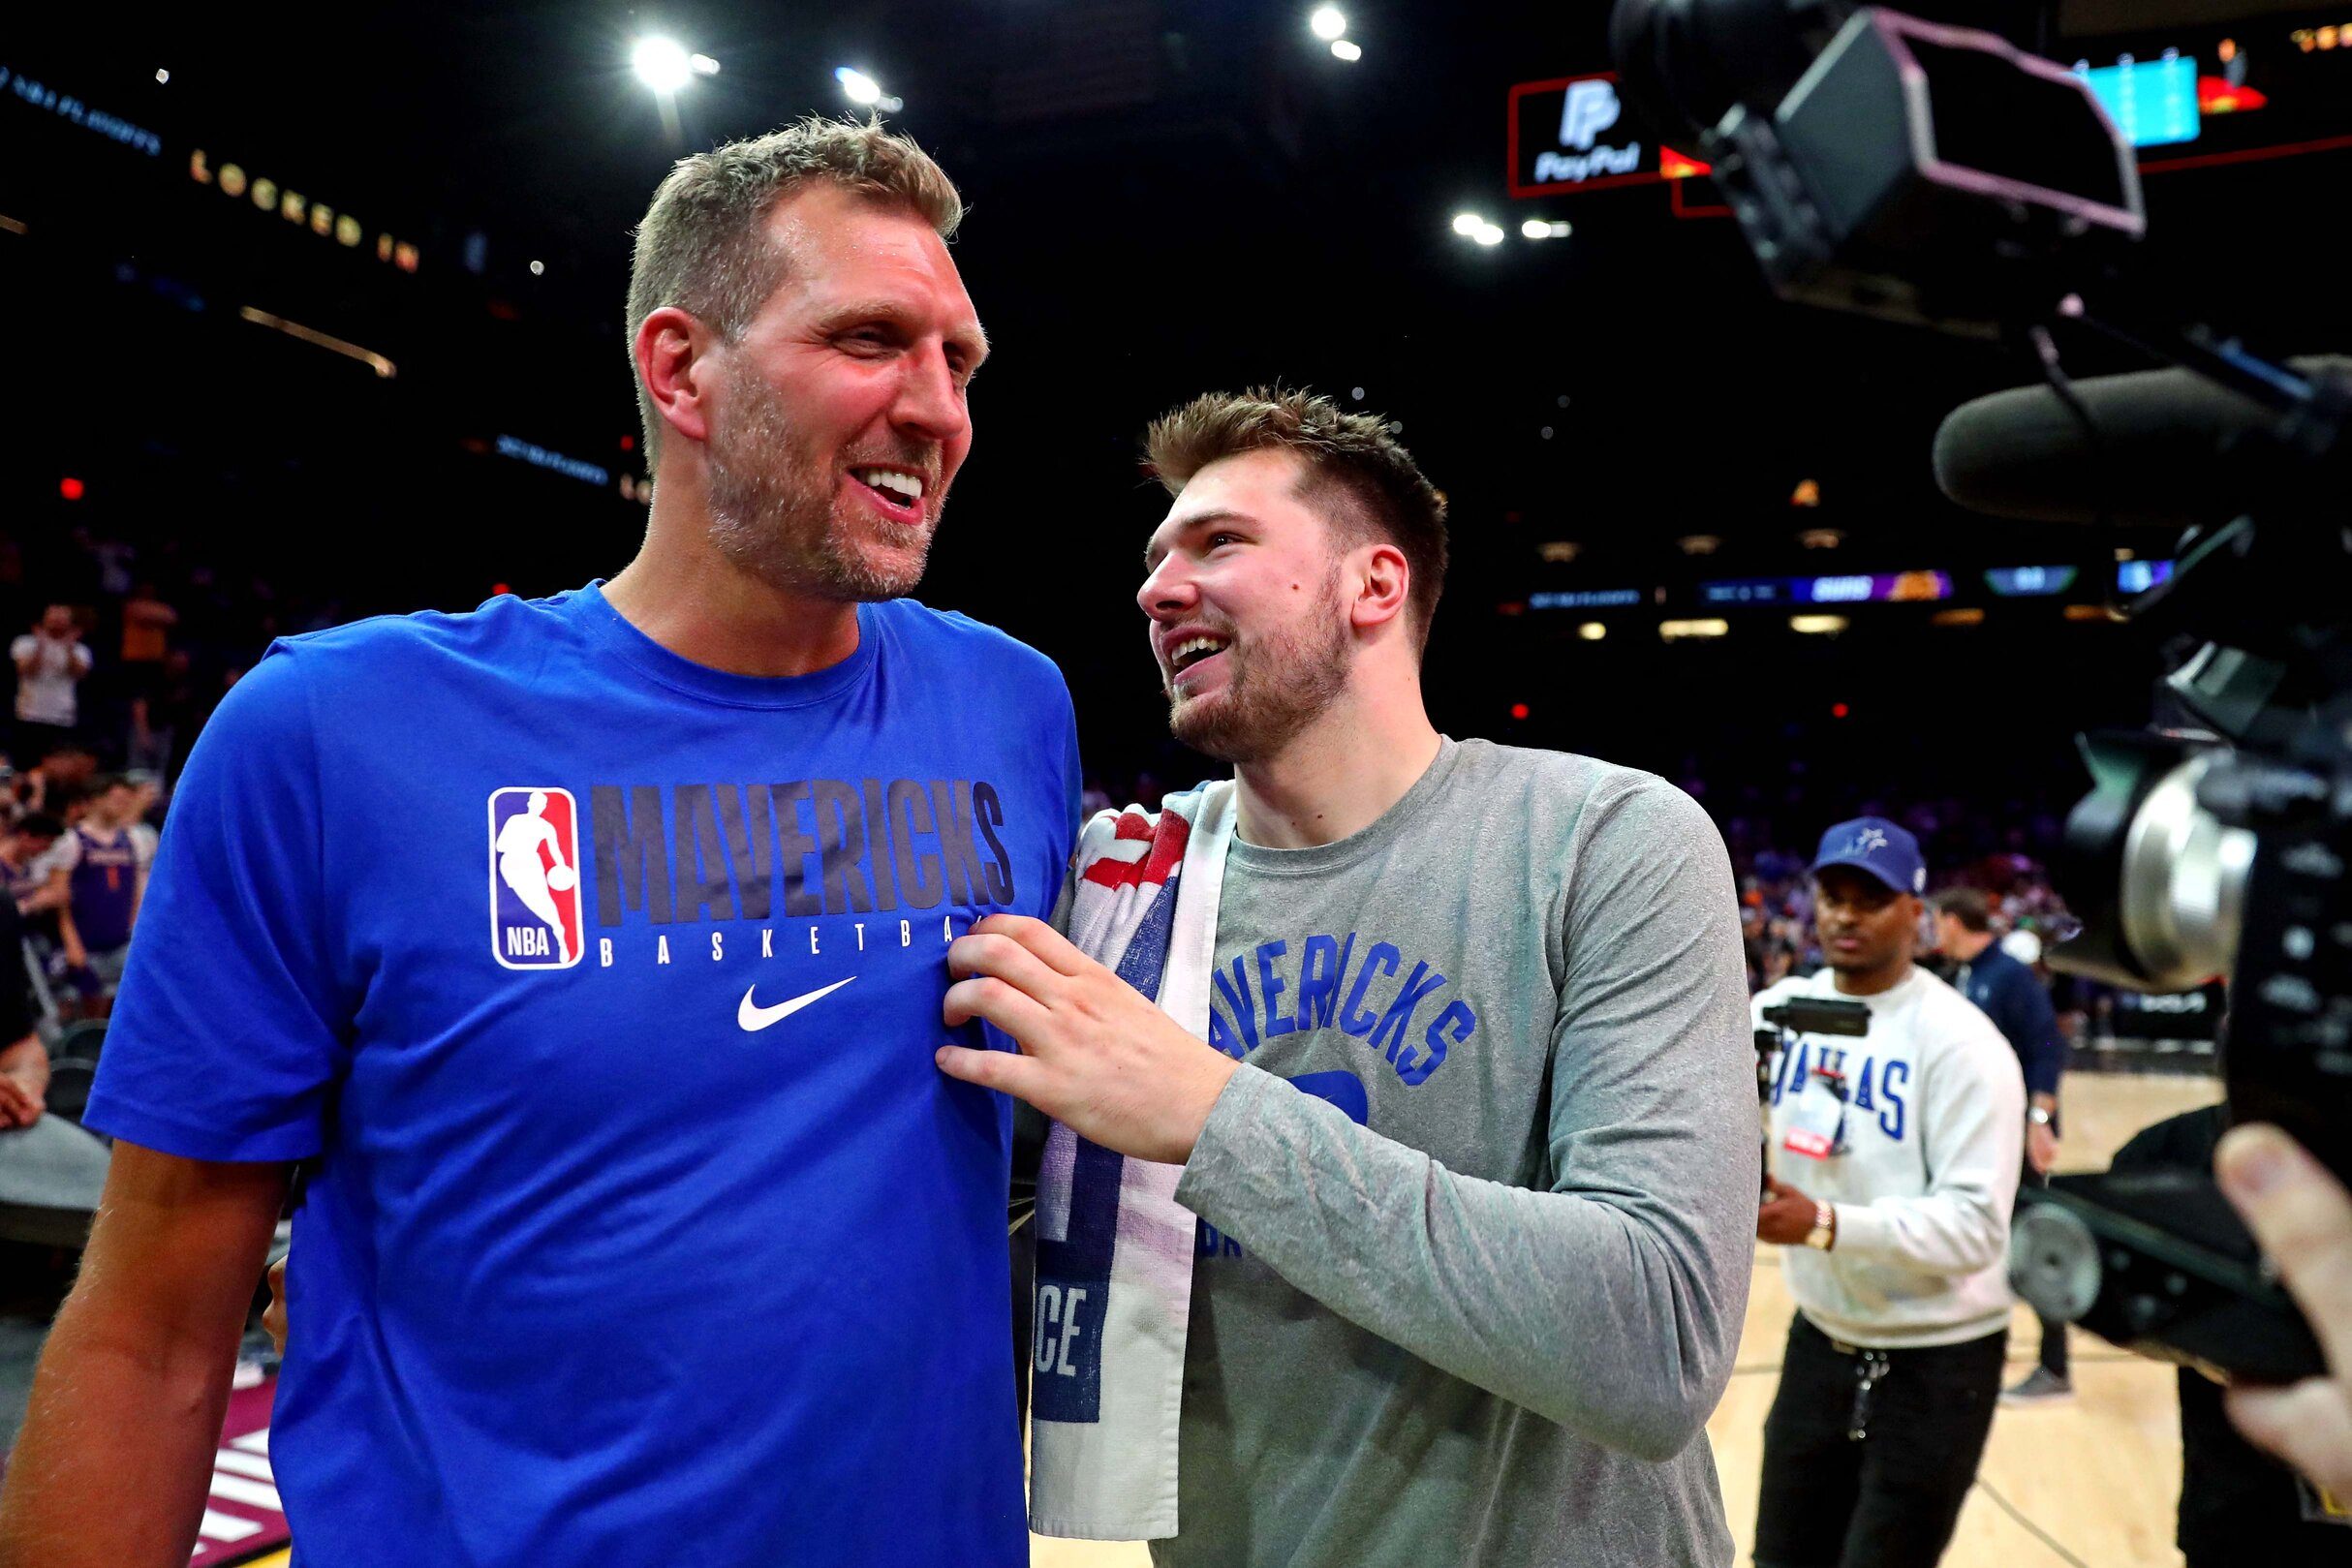 WATCH: Luka, Dirk share emotional moment after Mavs’ Game 7 win vs Suns